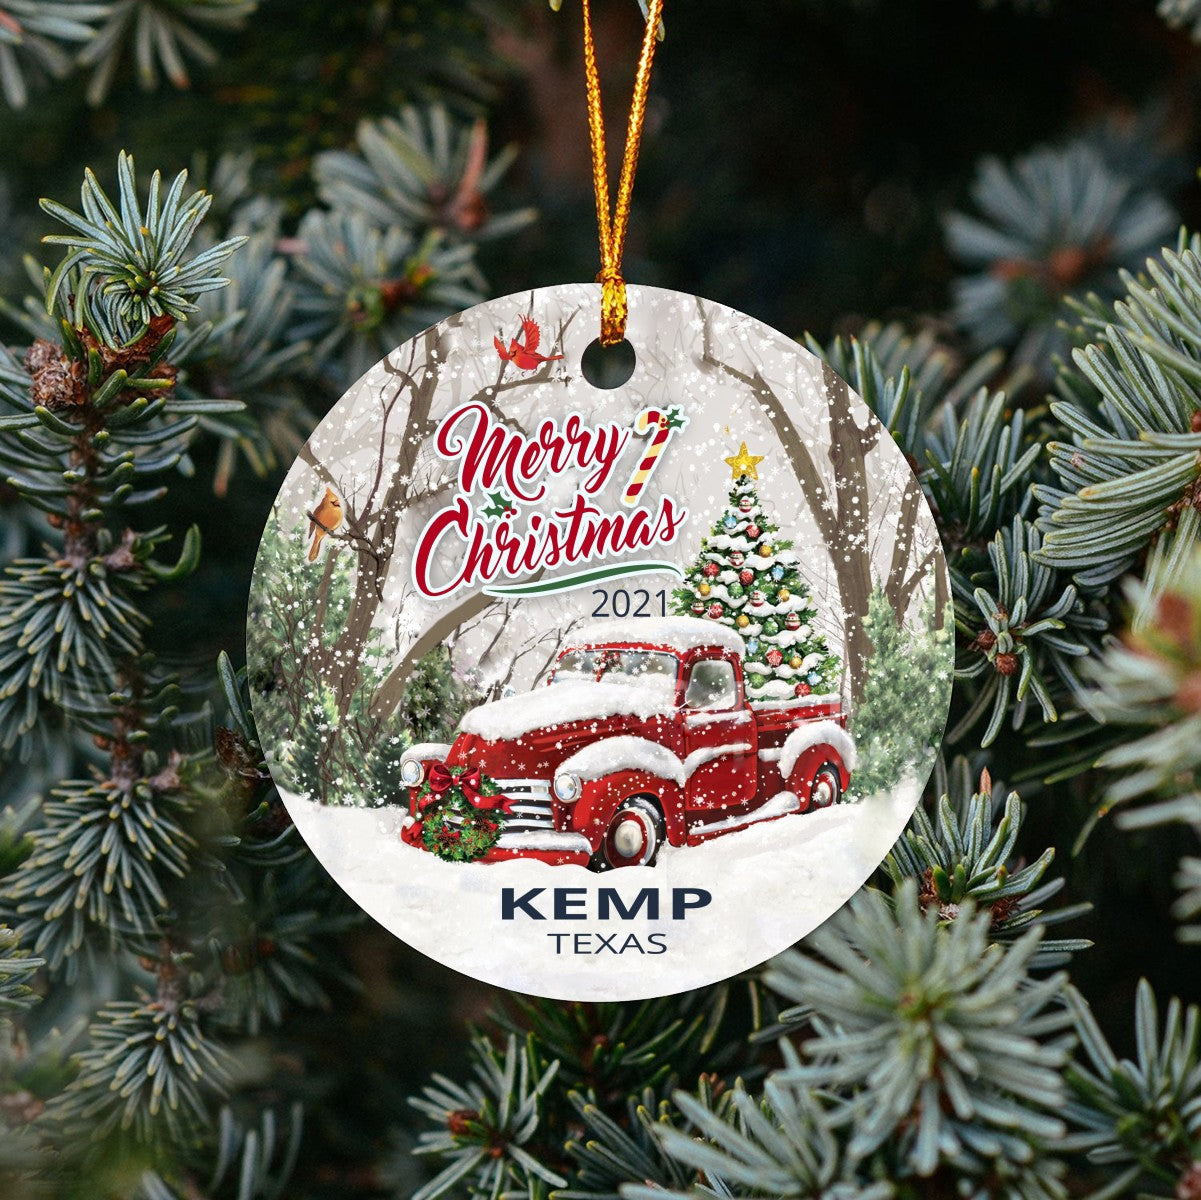 Christmas Tree Ornaments Kemp - Ornament With Name City, State Kemp Texas TX Ornament - Red Truck Xmas Ornaments 3'' Plastic Gift For Family, Friend And Housewarming